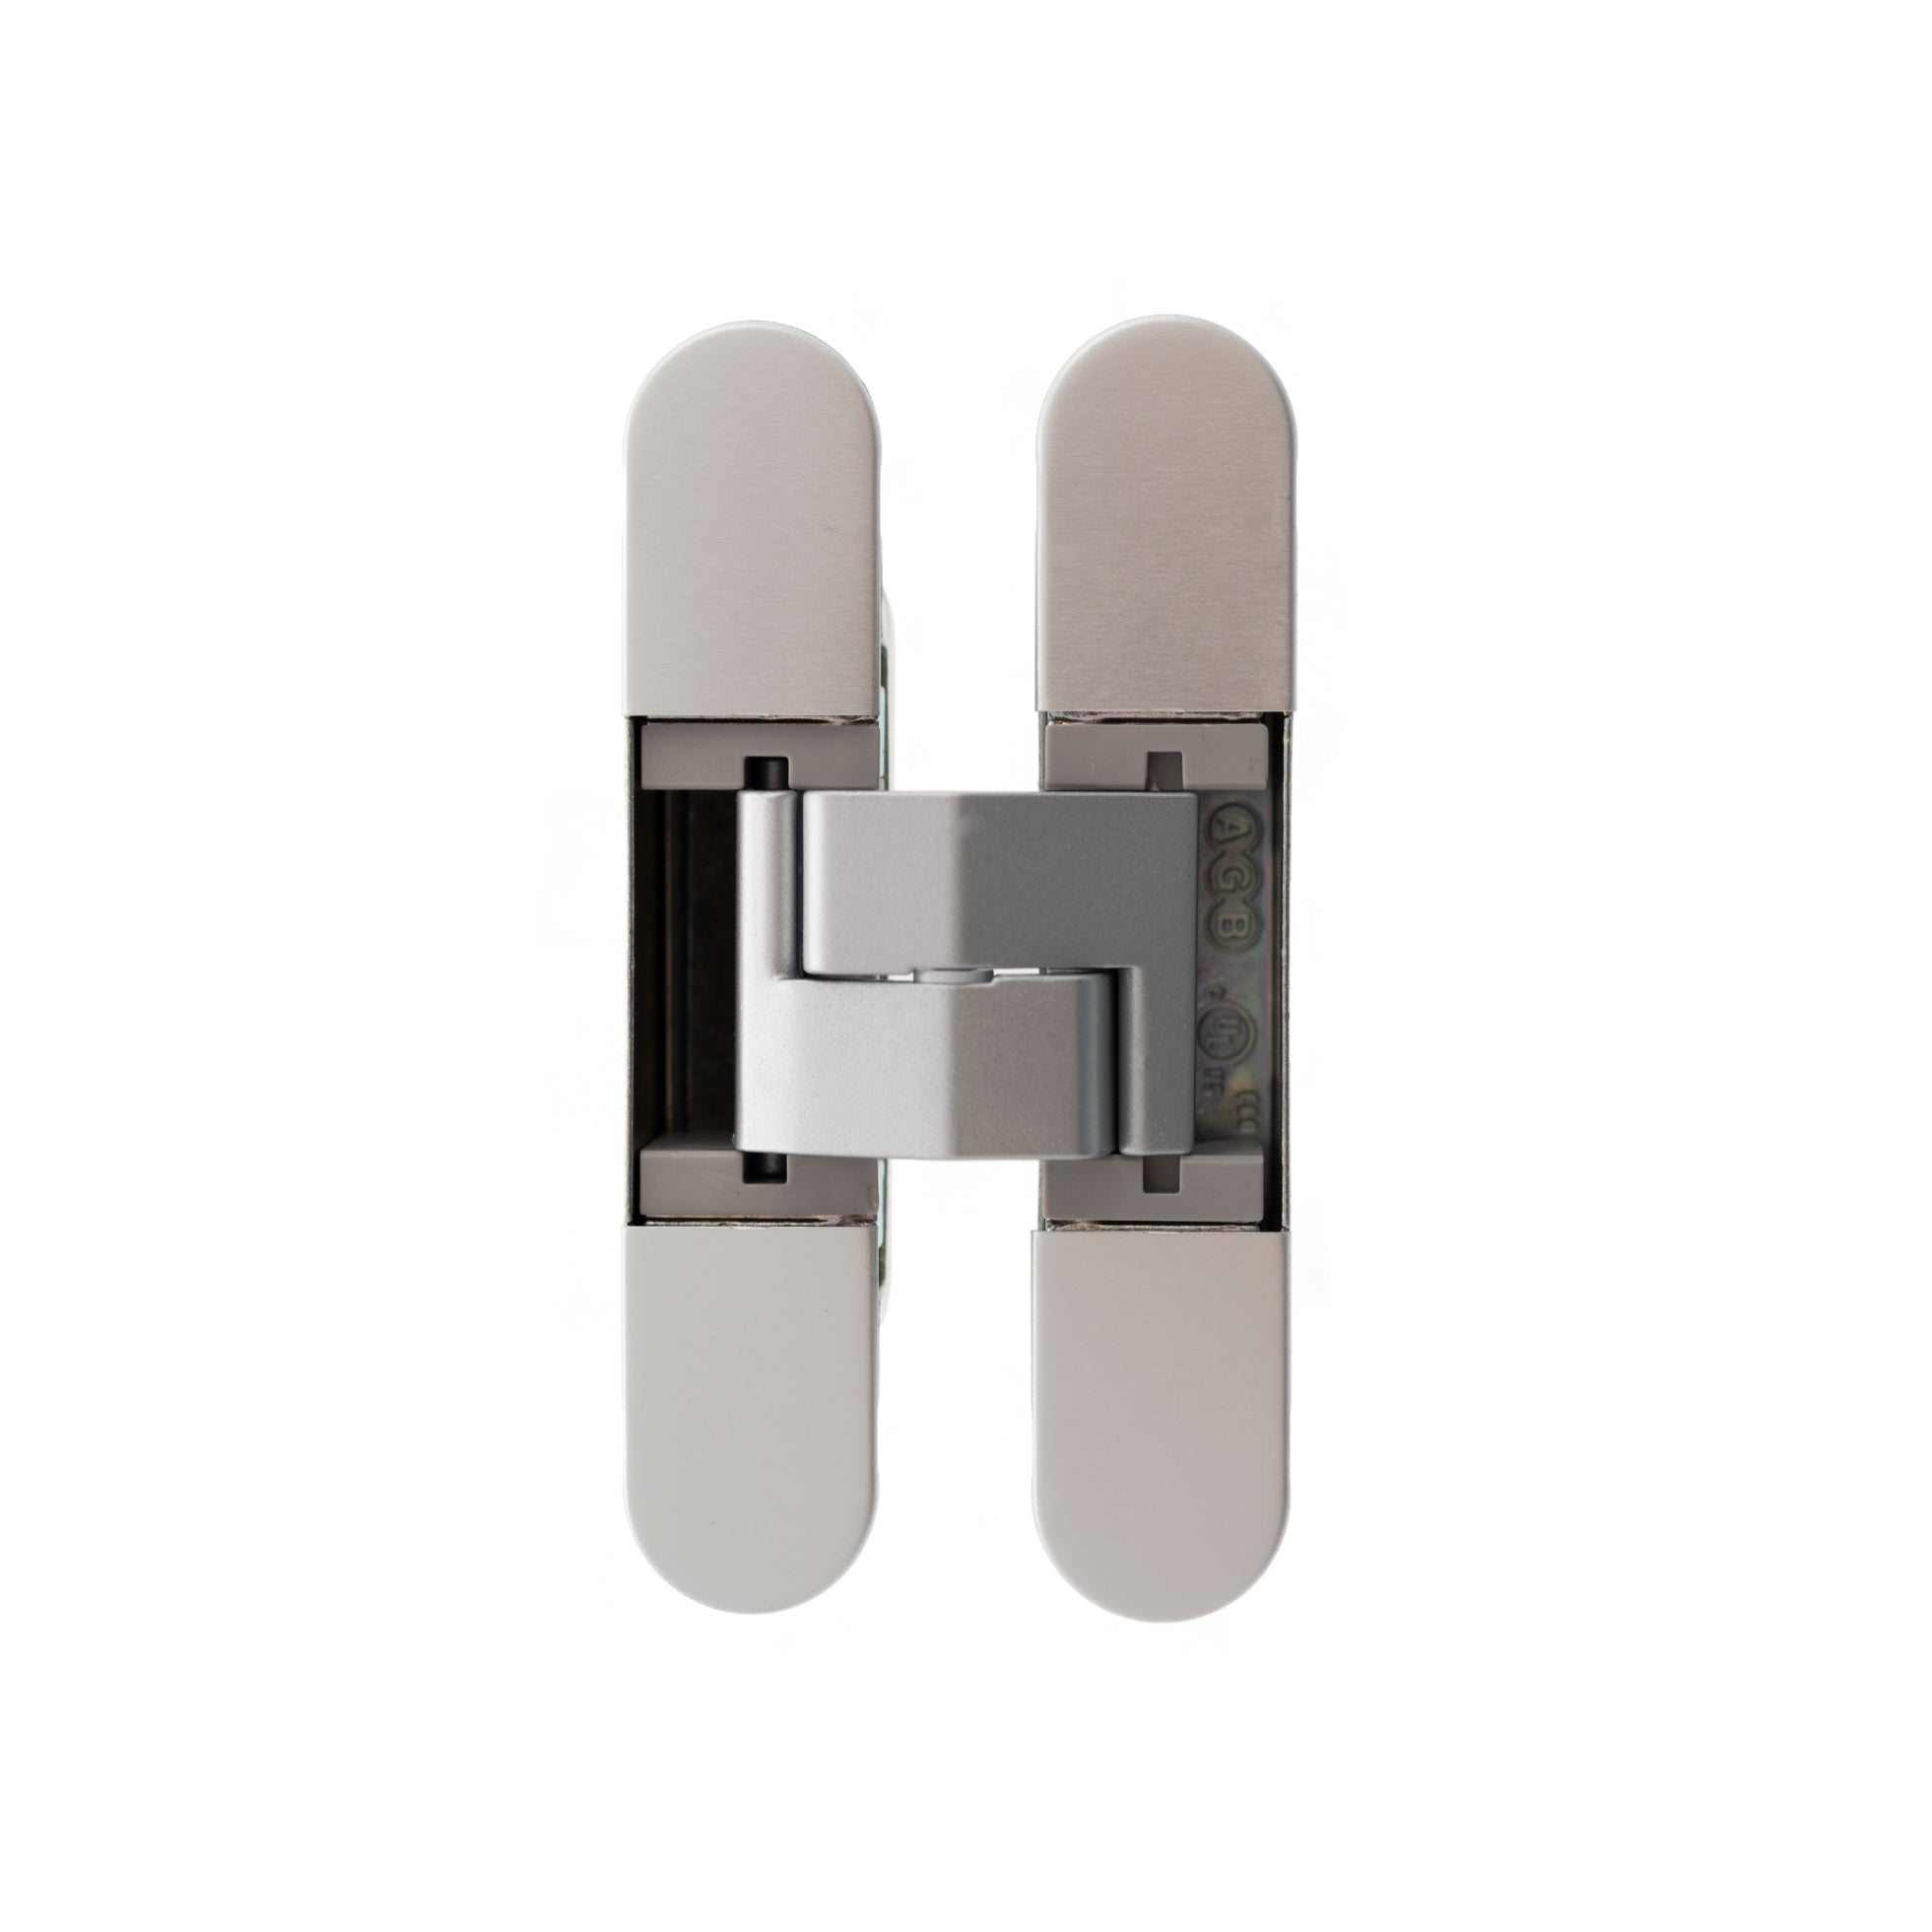 AGB Eclipse Fire Rated Adjustable Concealed Hinge - Satin Chrome